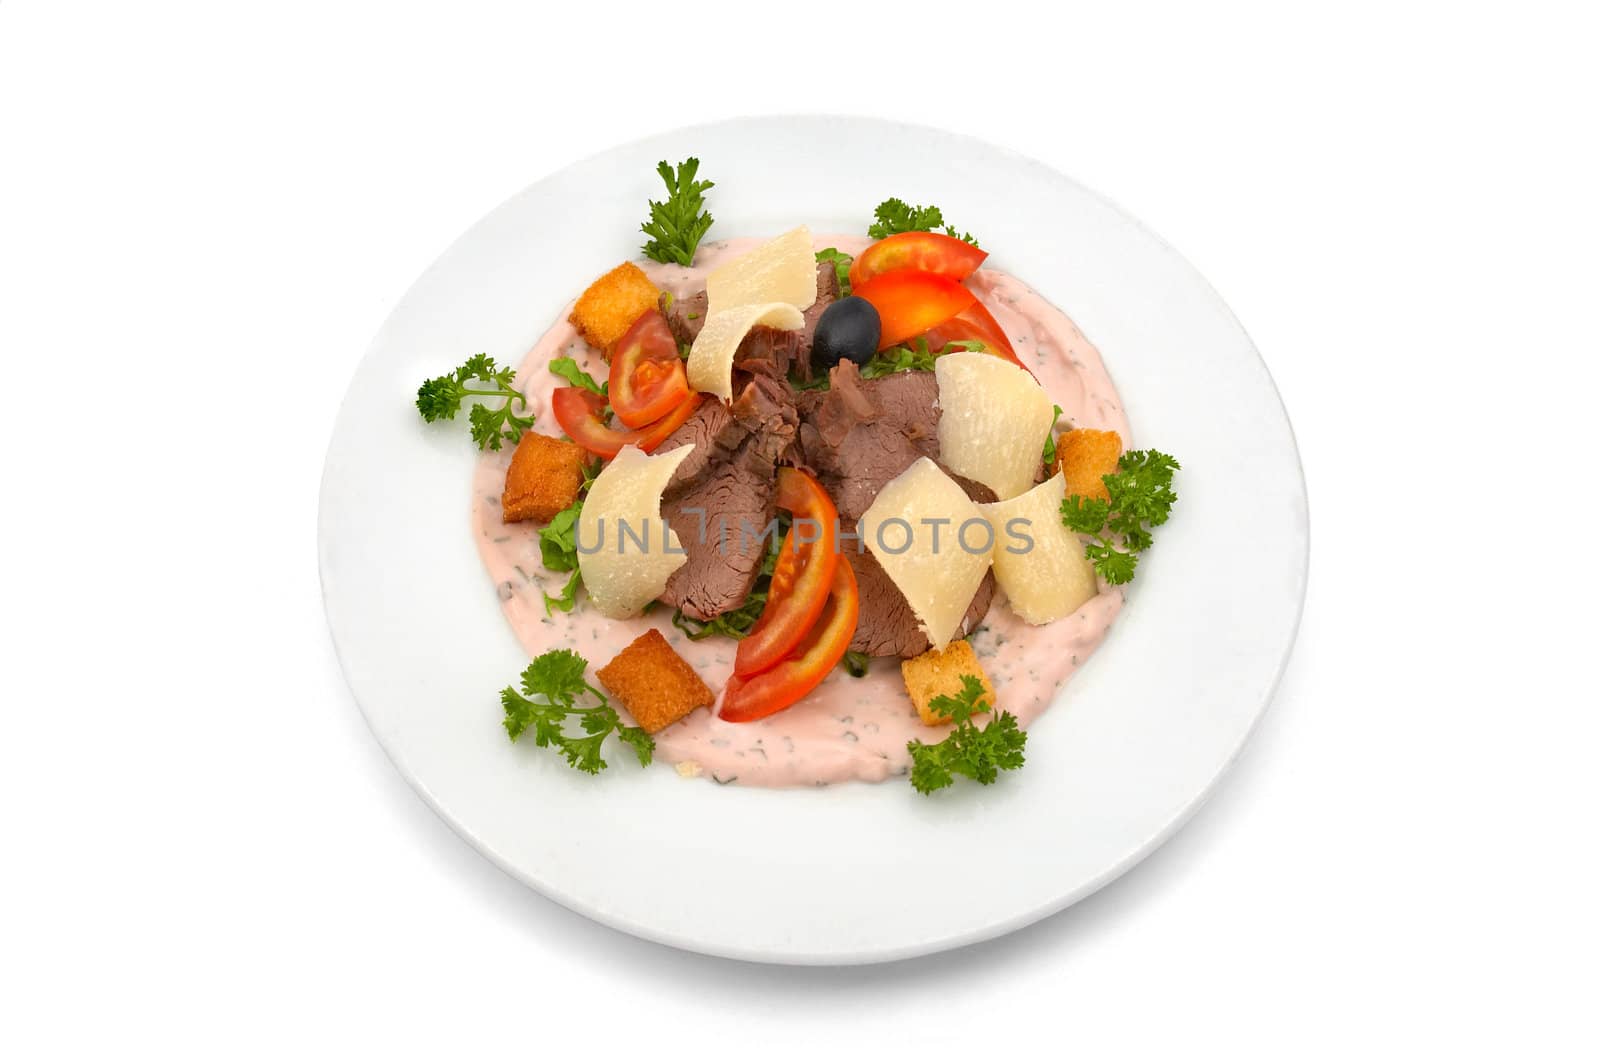 Veal salad with sliced fresh tomato, parmesan chips and cracker pieces, dressed with rose sauce and parsley